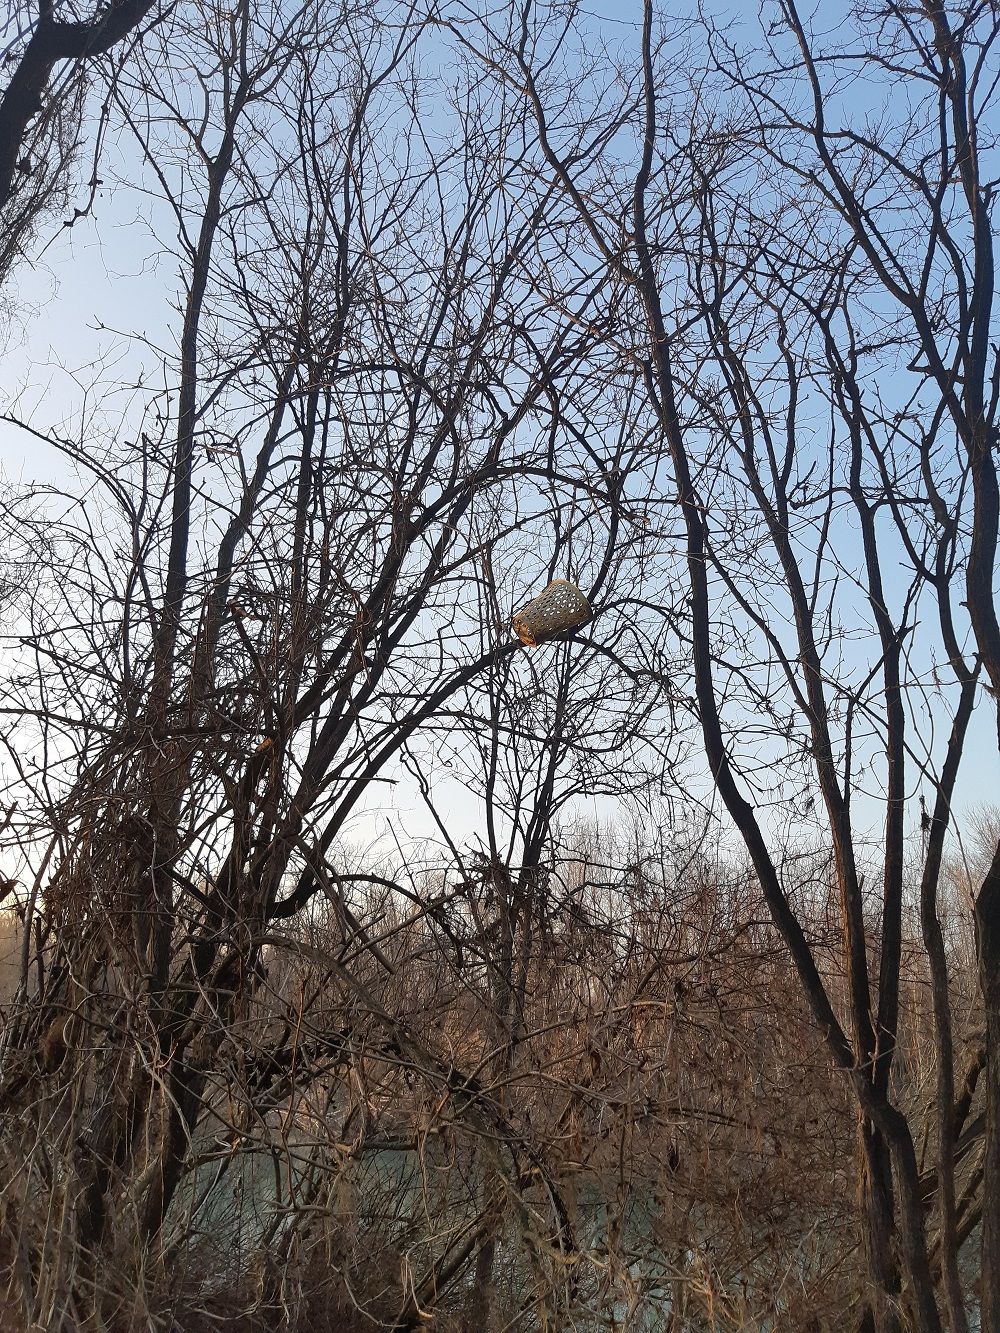 Plastic perched on branches